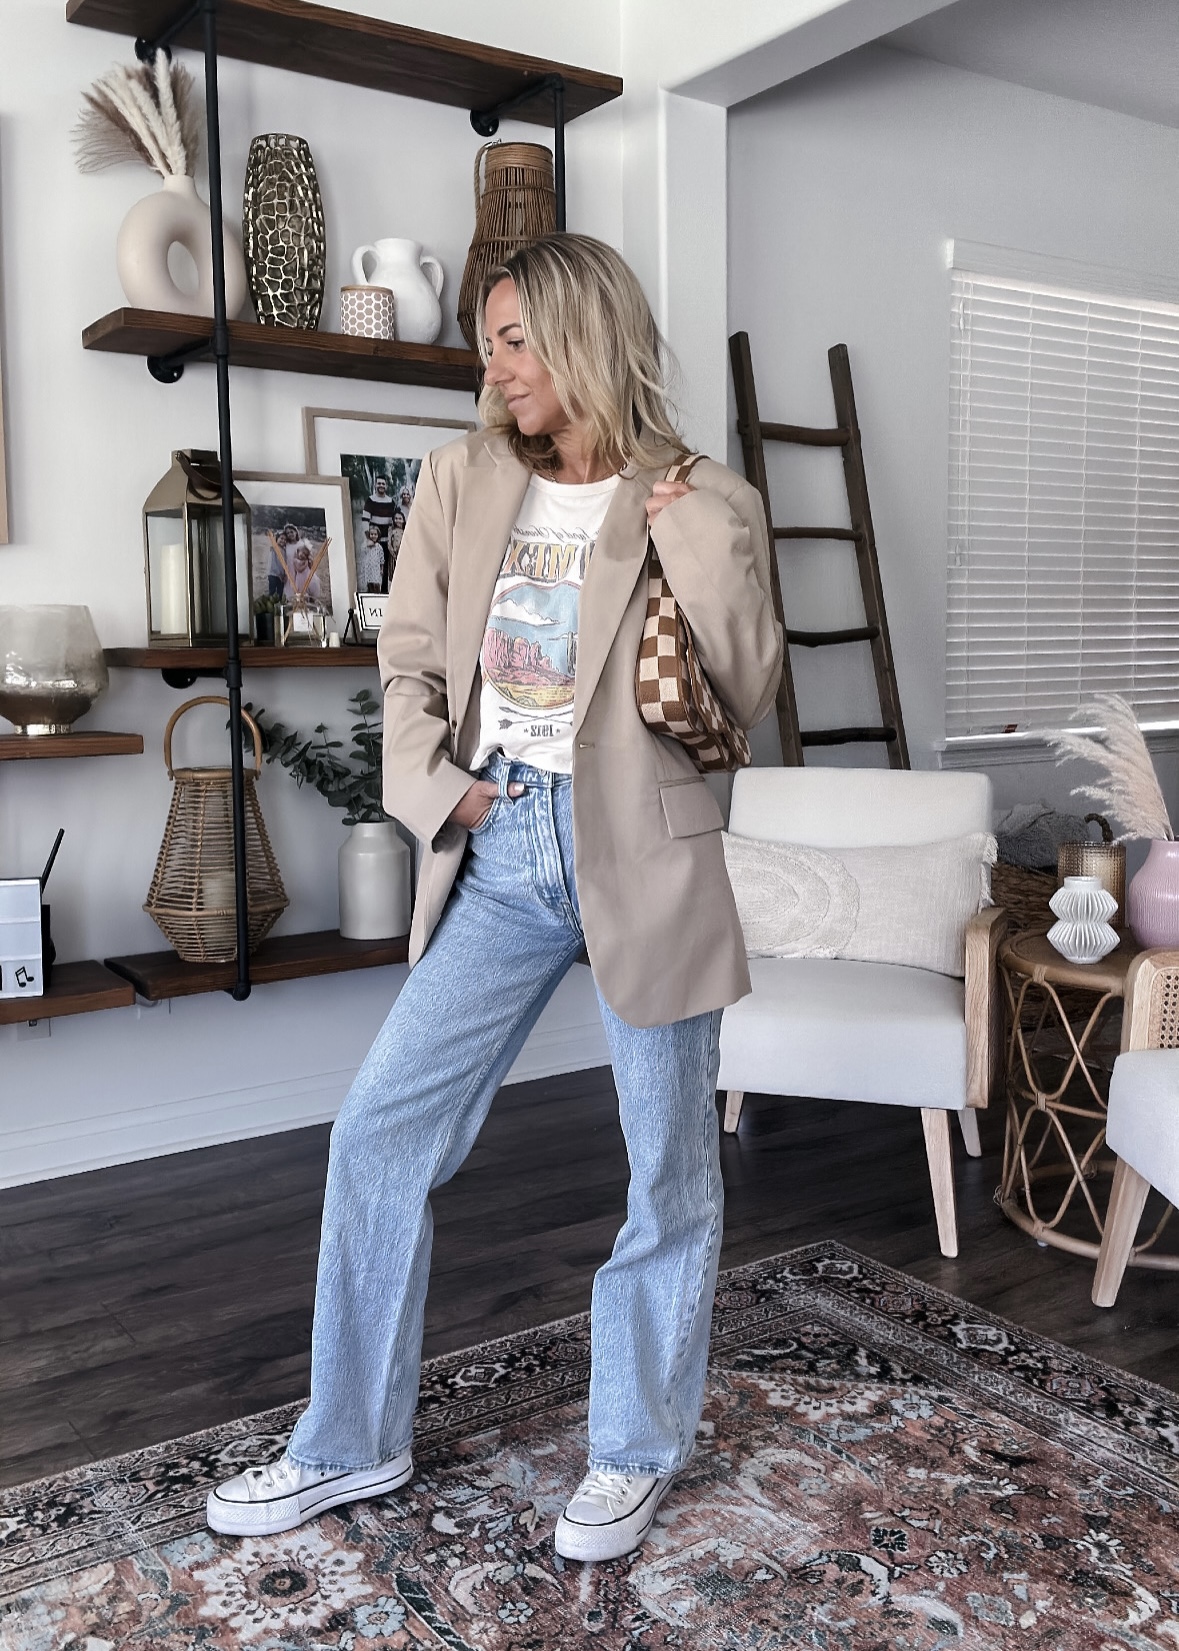 Best of Amazon Blazers & Tips for Styling Them-Jaclyn De Leon style. Blazers are a must-have closet staple and something everyone needs in their wardrobe. They are classic + chic and can easily dress up any outfit.